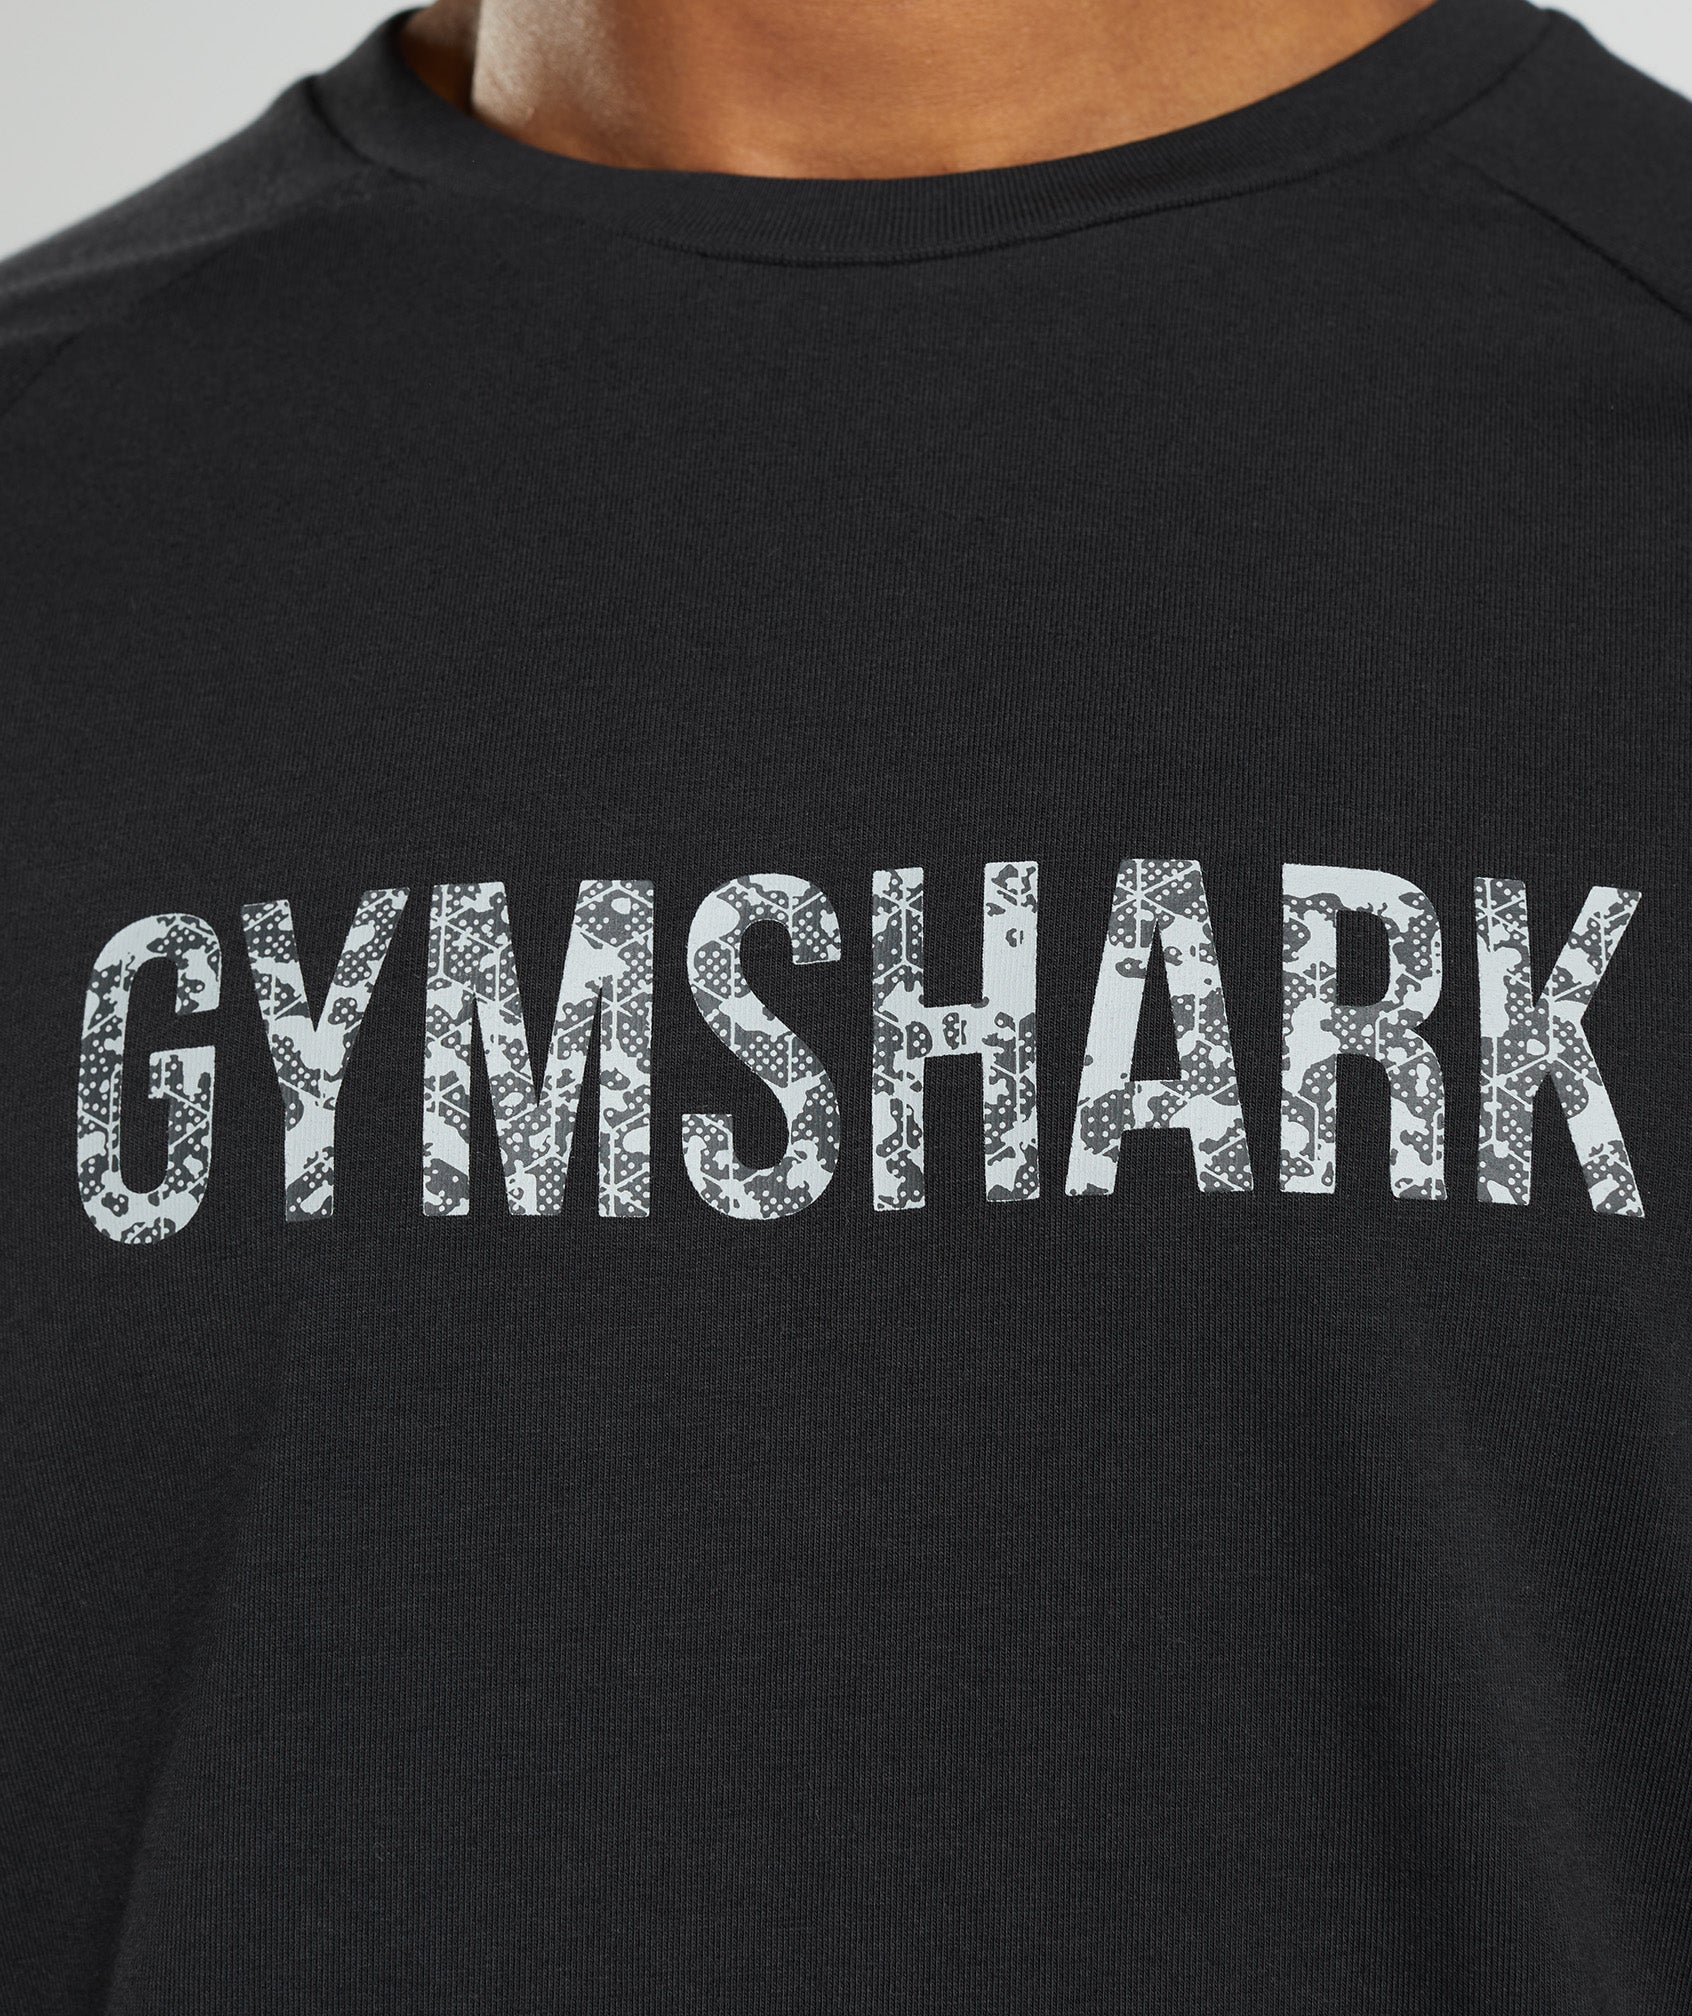 Gymshark Camo T-shirt (New) (XS) for Sale in Vista, CA - OfferUp